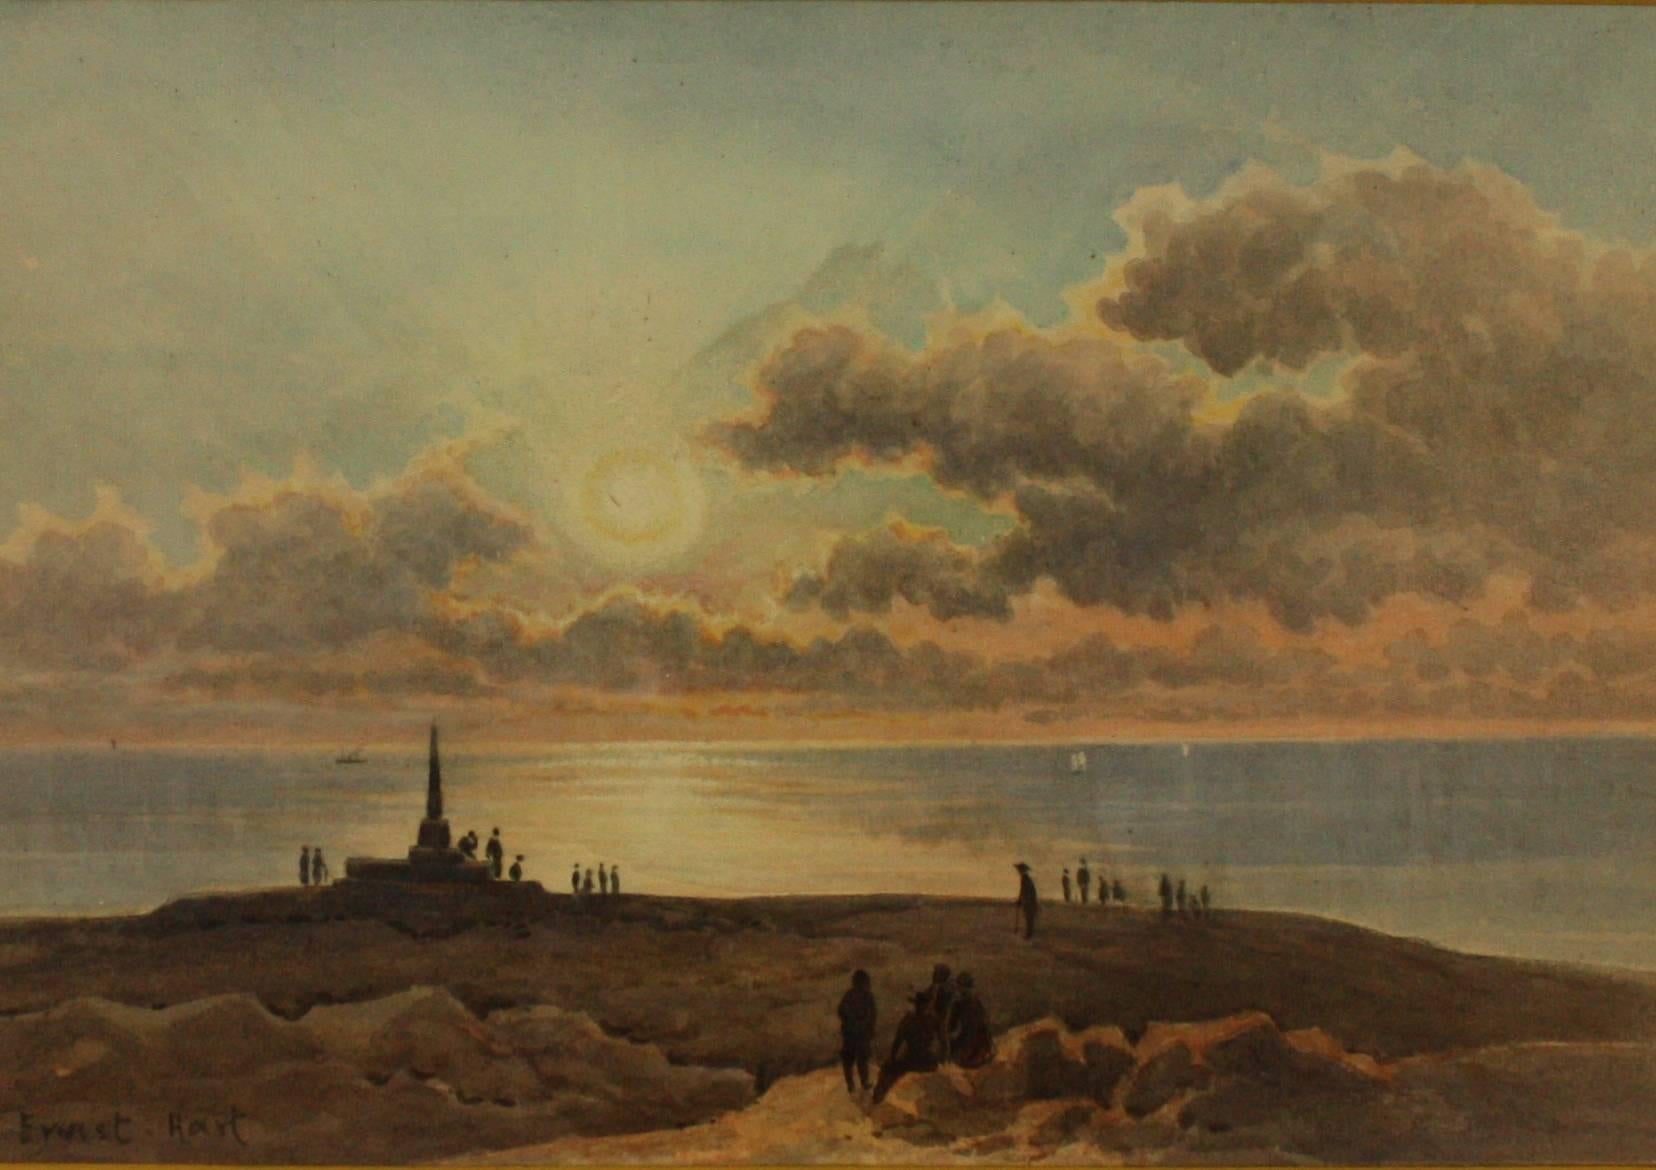 The Midnight Sun from the top of the North Cape - Painting by Sydney Ernest Hart